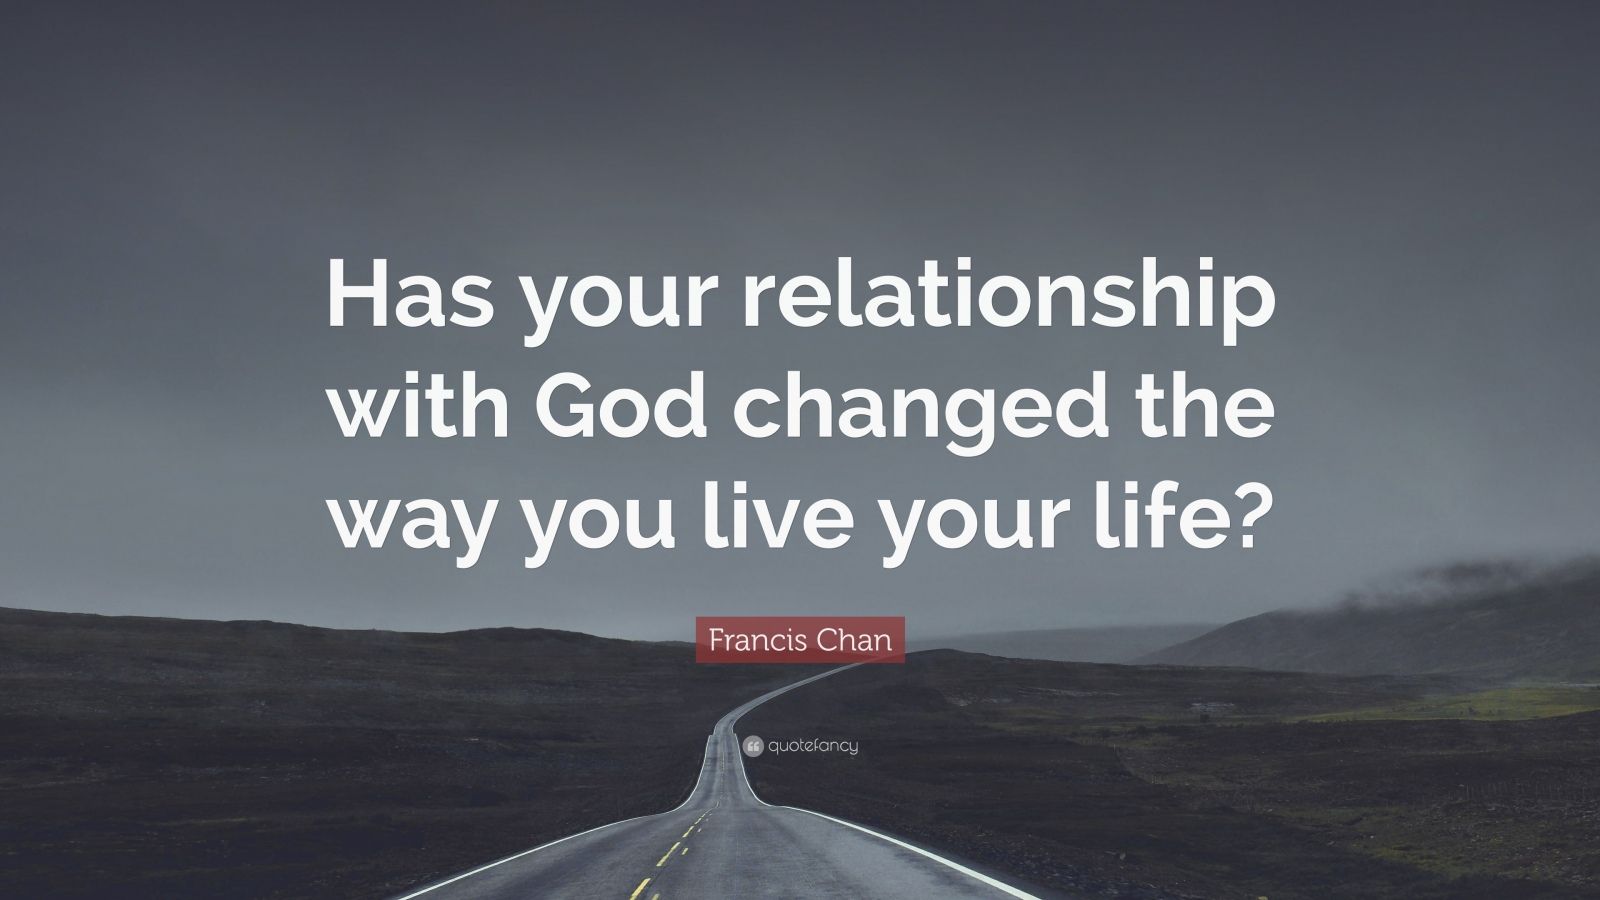 Francis Chan Quote: “Has your relationship with God changed the way you